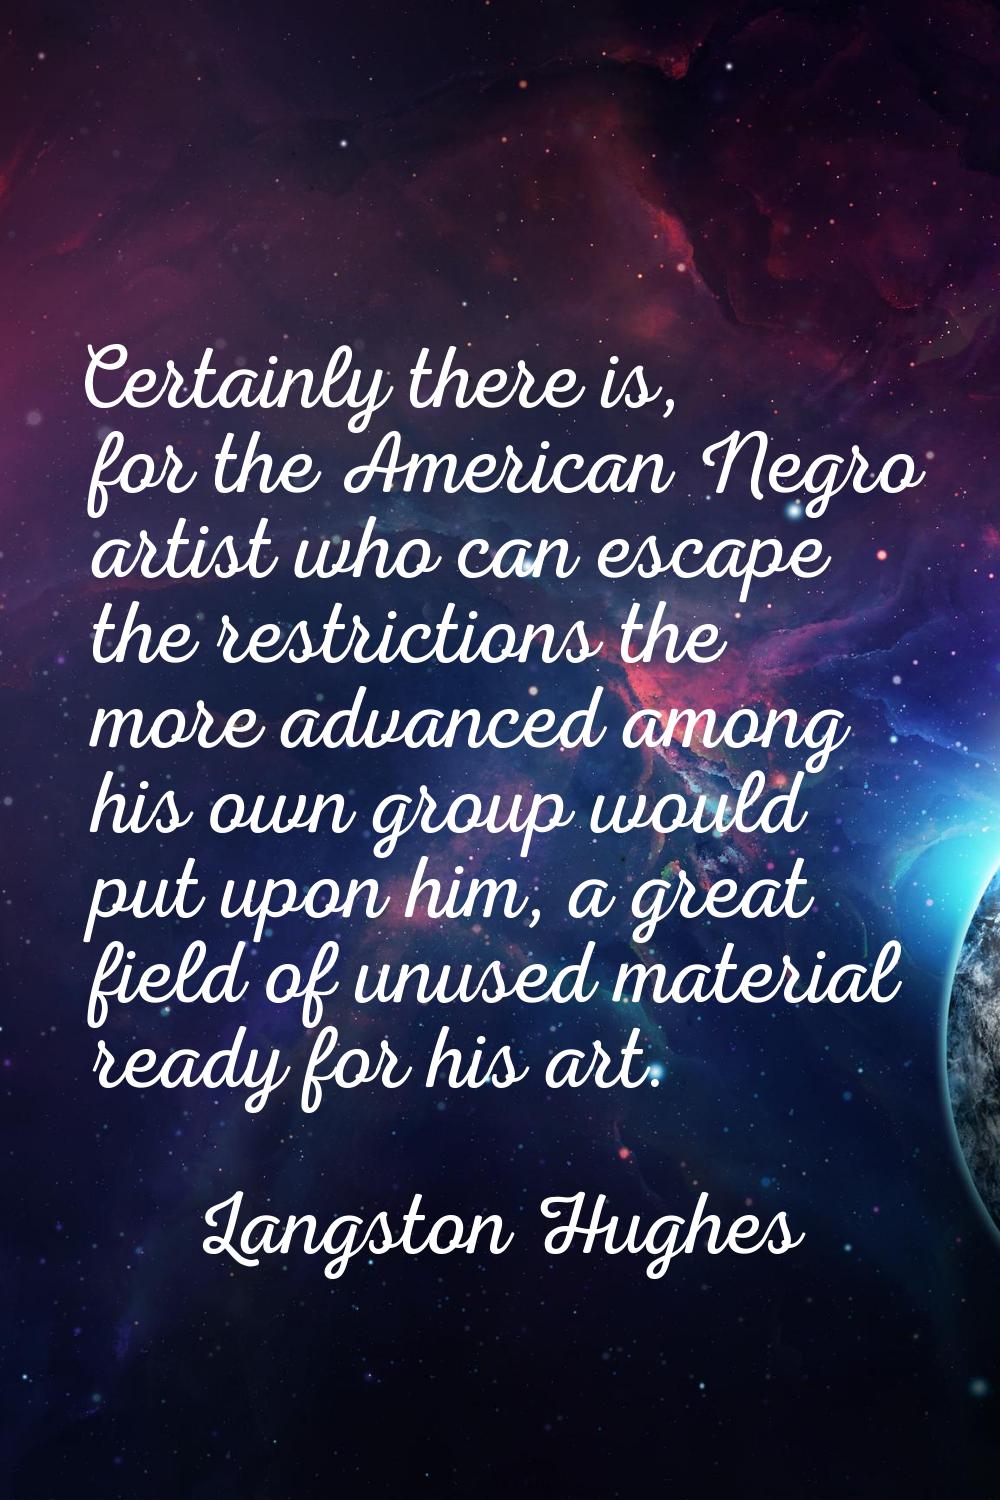 Certainly there is, for the American Negro artist who can escape the restrictions the more advanced